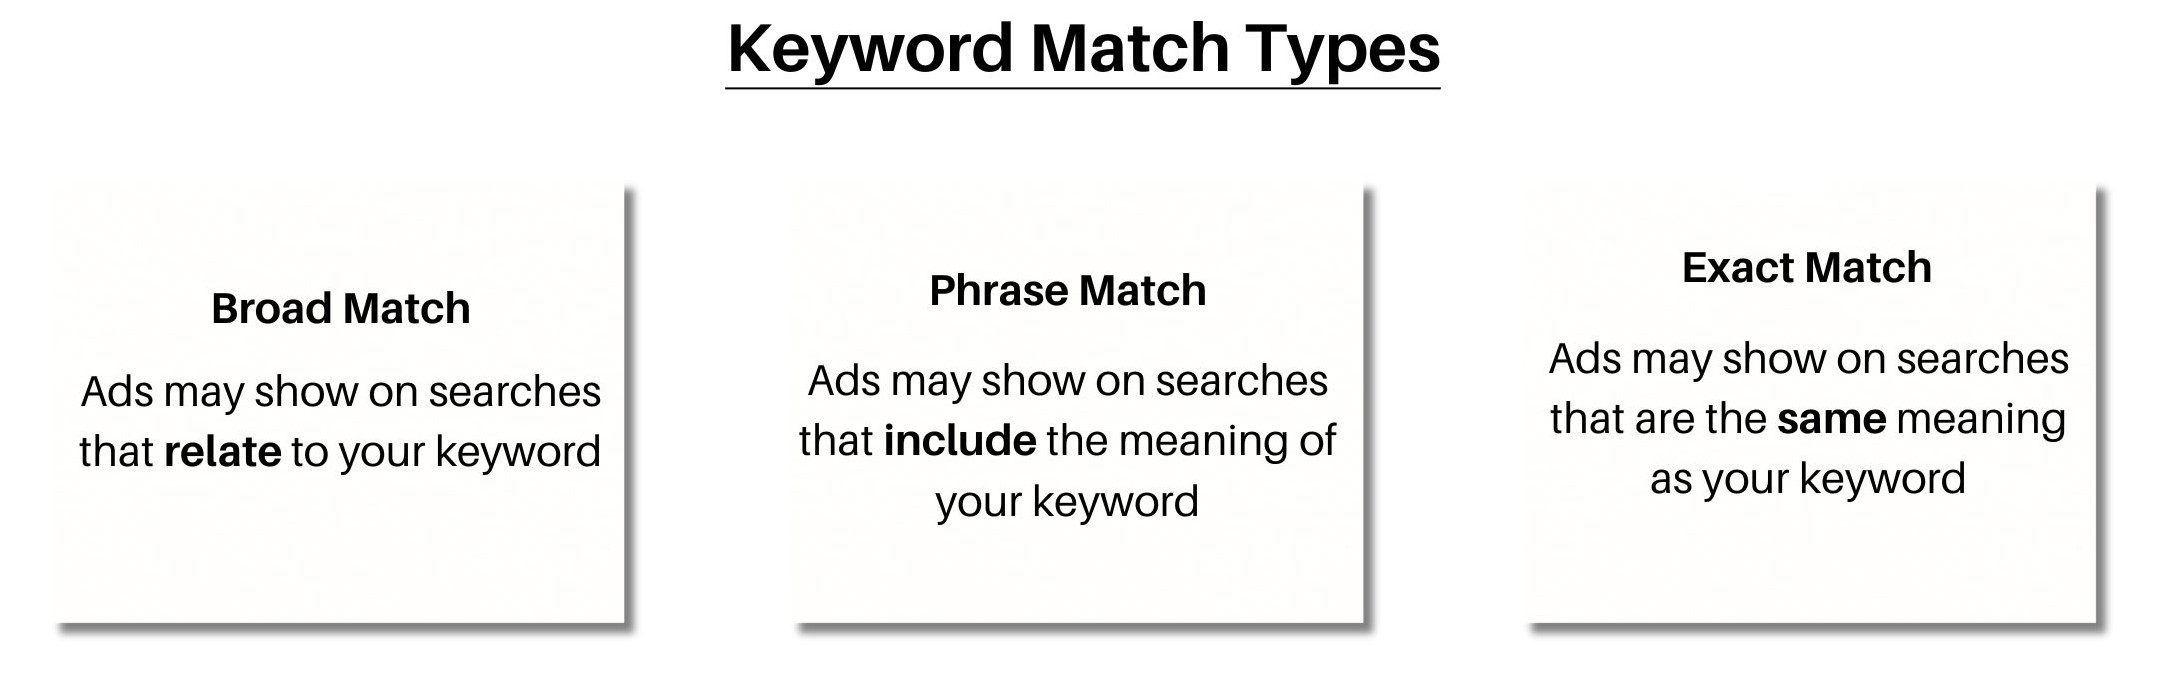 Keyword Match Type definitions in a horizontal format: Broad Match, Phrase Match and Exact Match